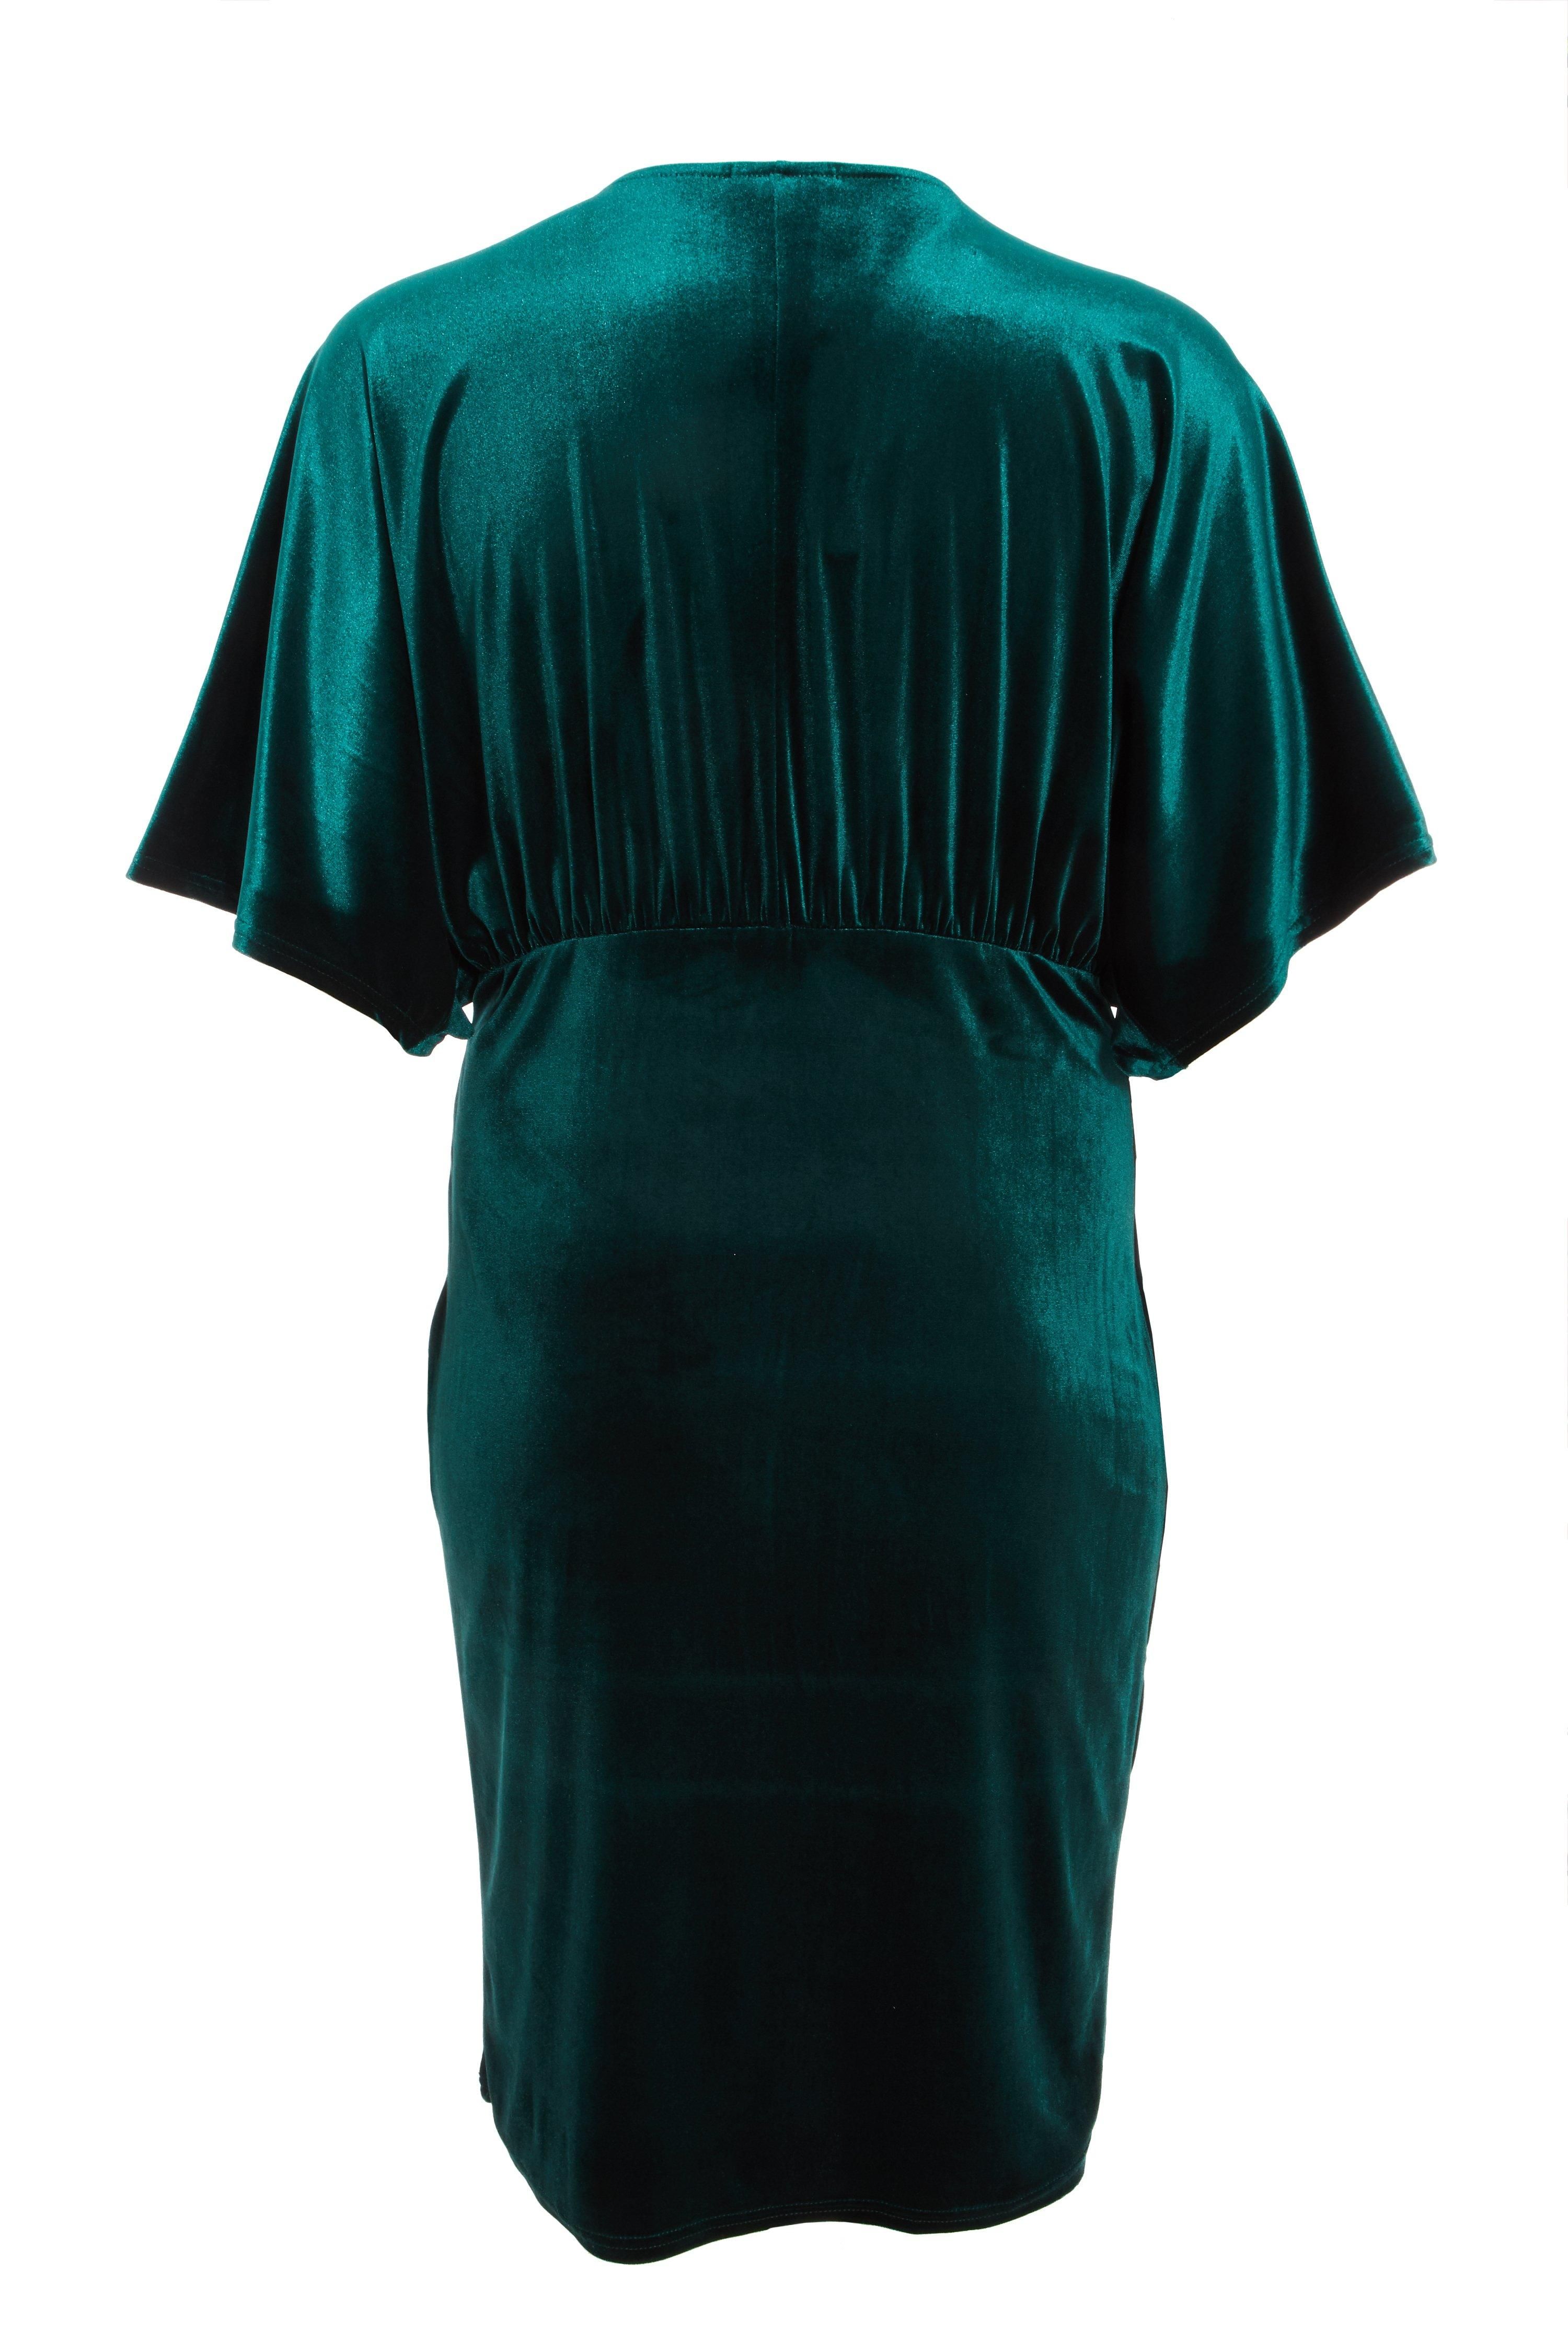 - Curve collection  - Velvet finish  - Bodycon fit   - V neck  - Batwing sleeve  - Length: 125cm approx  - Model Height: 5' 9